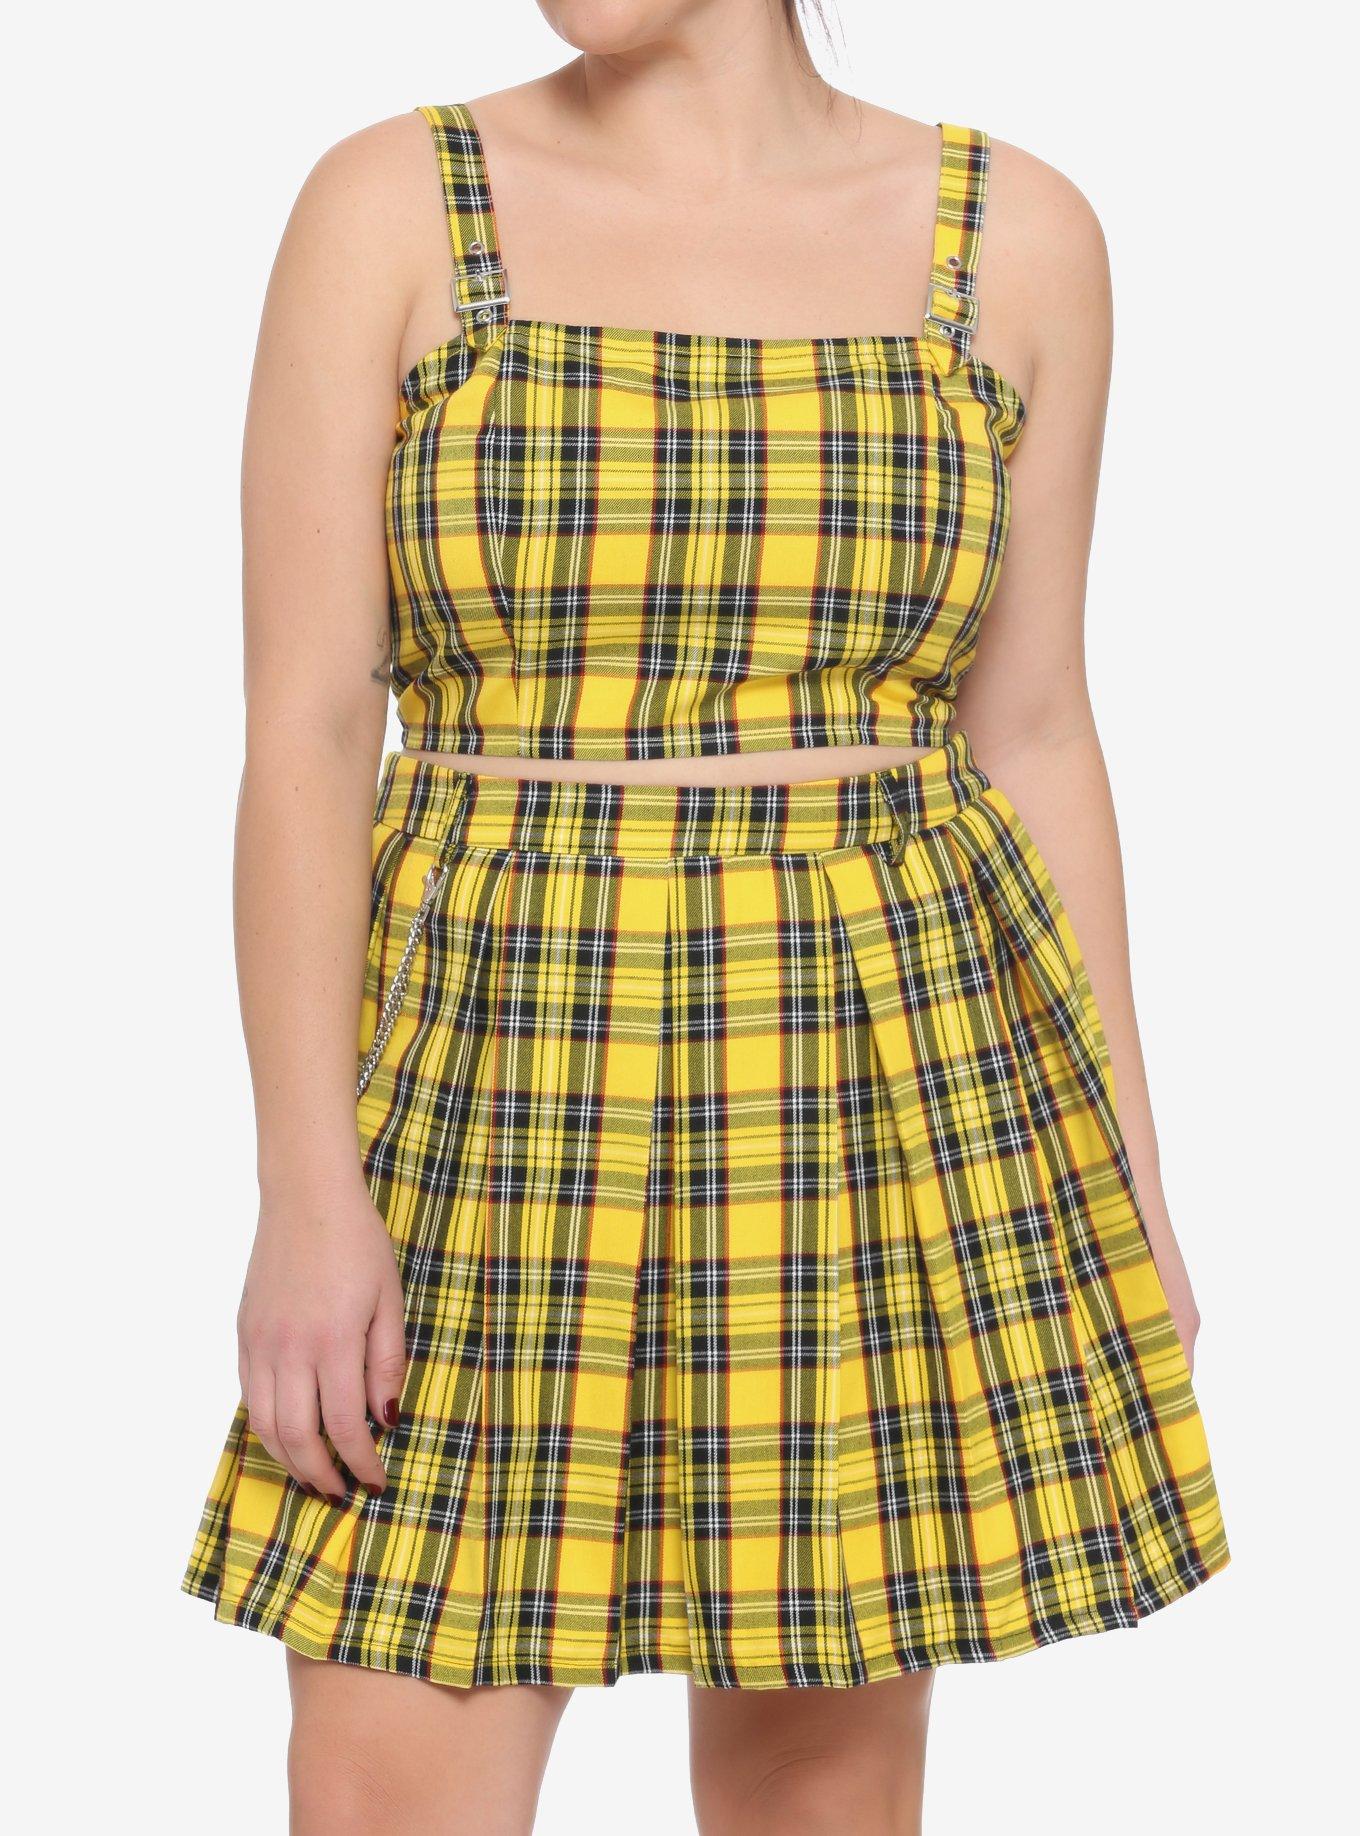 Yellow Plaid Girls Crop Woven Top Plus Size, PLAID - YELLOW, hi-res